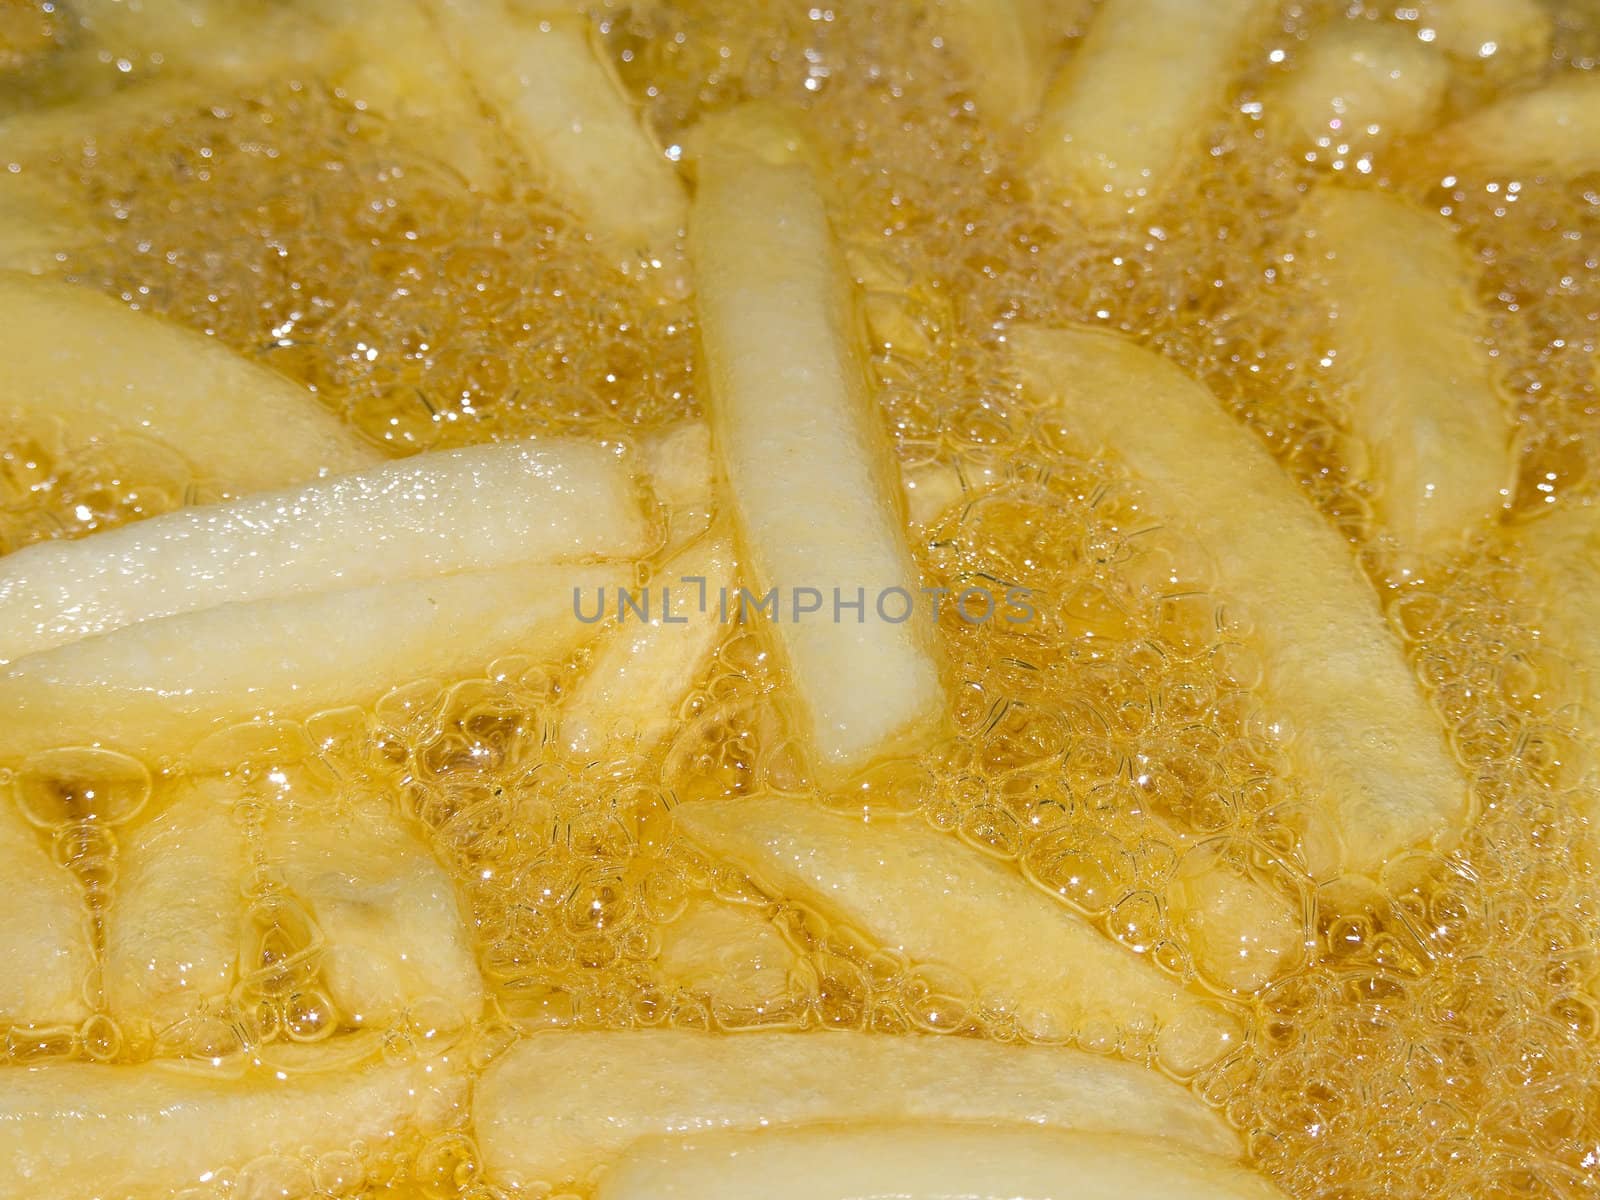 Close-up on some french fries